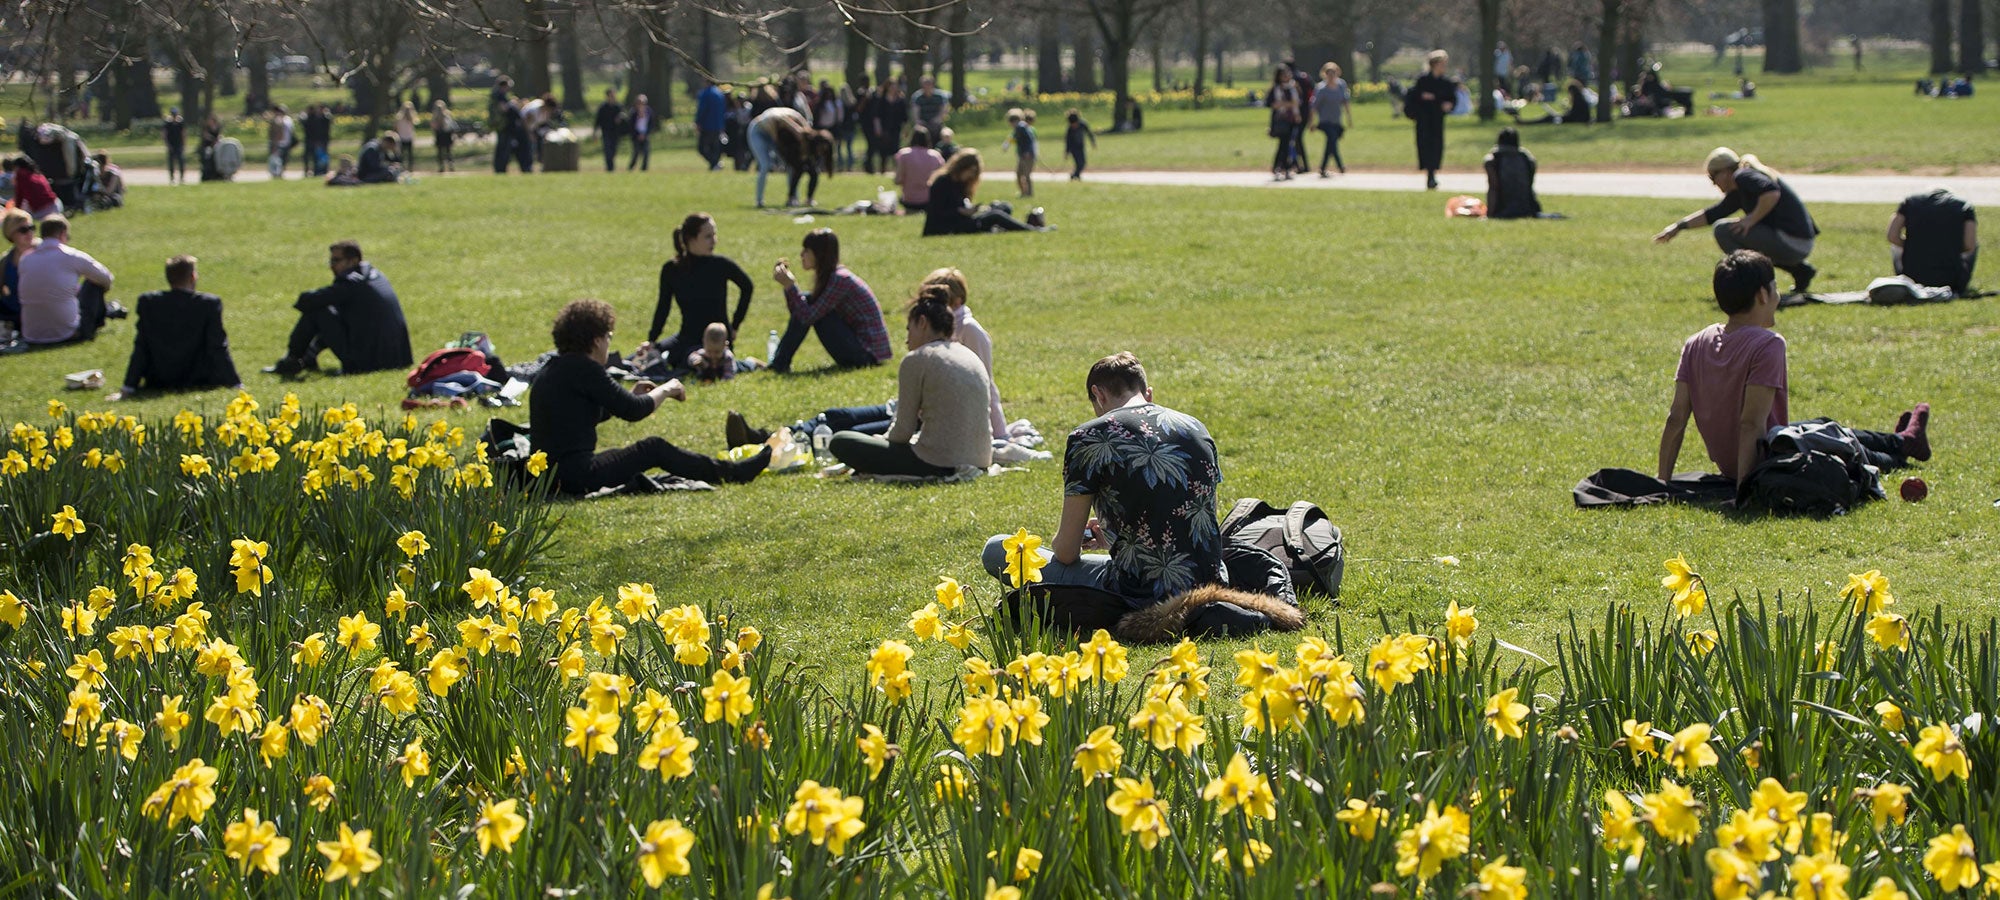 The whole of the UK is set to feel warm temperatures over the weekend